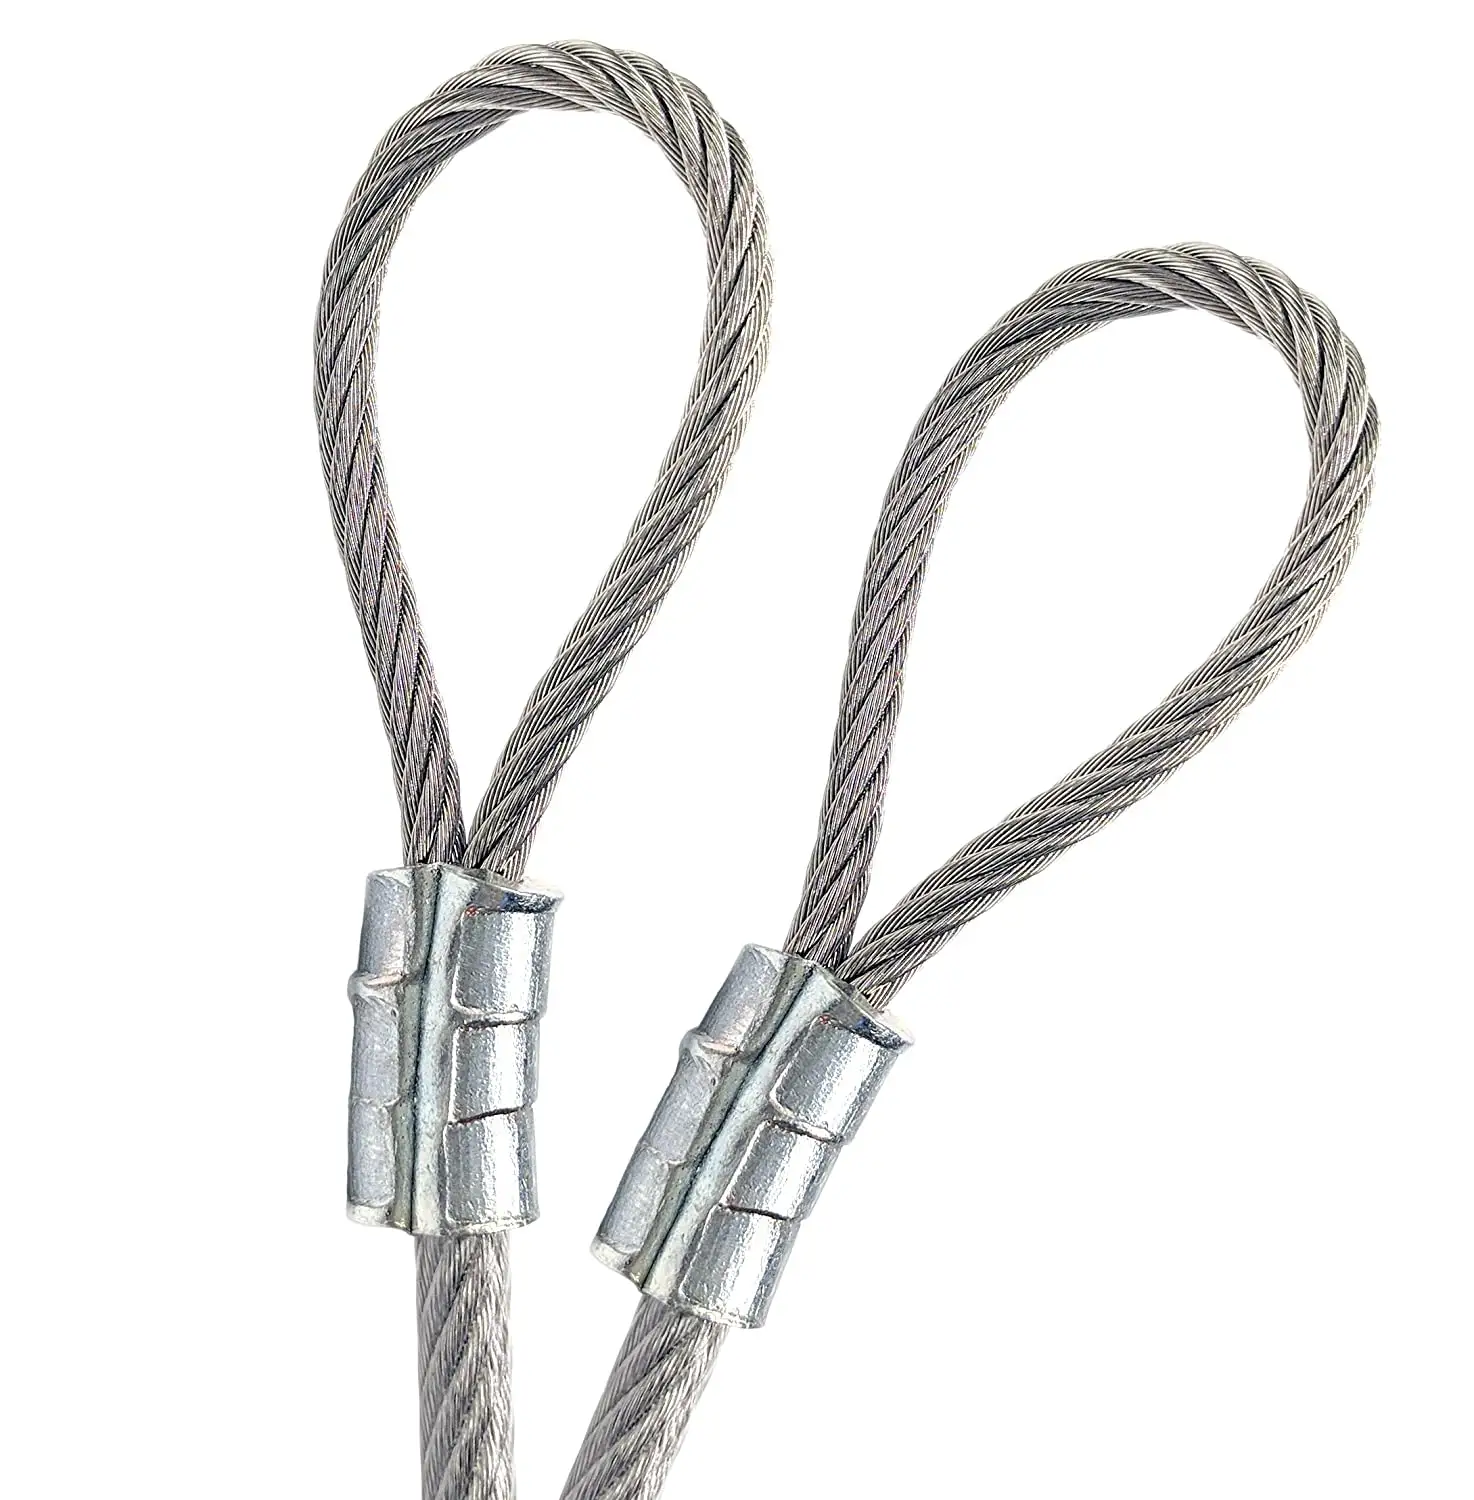 Aluminum Crimping Loop Sleeve Wire Rope Sleeves Double Barrel Ferrule for Wire Rope and Cable Line End